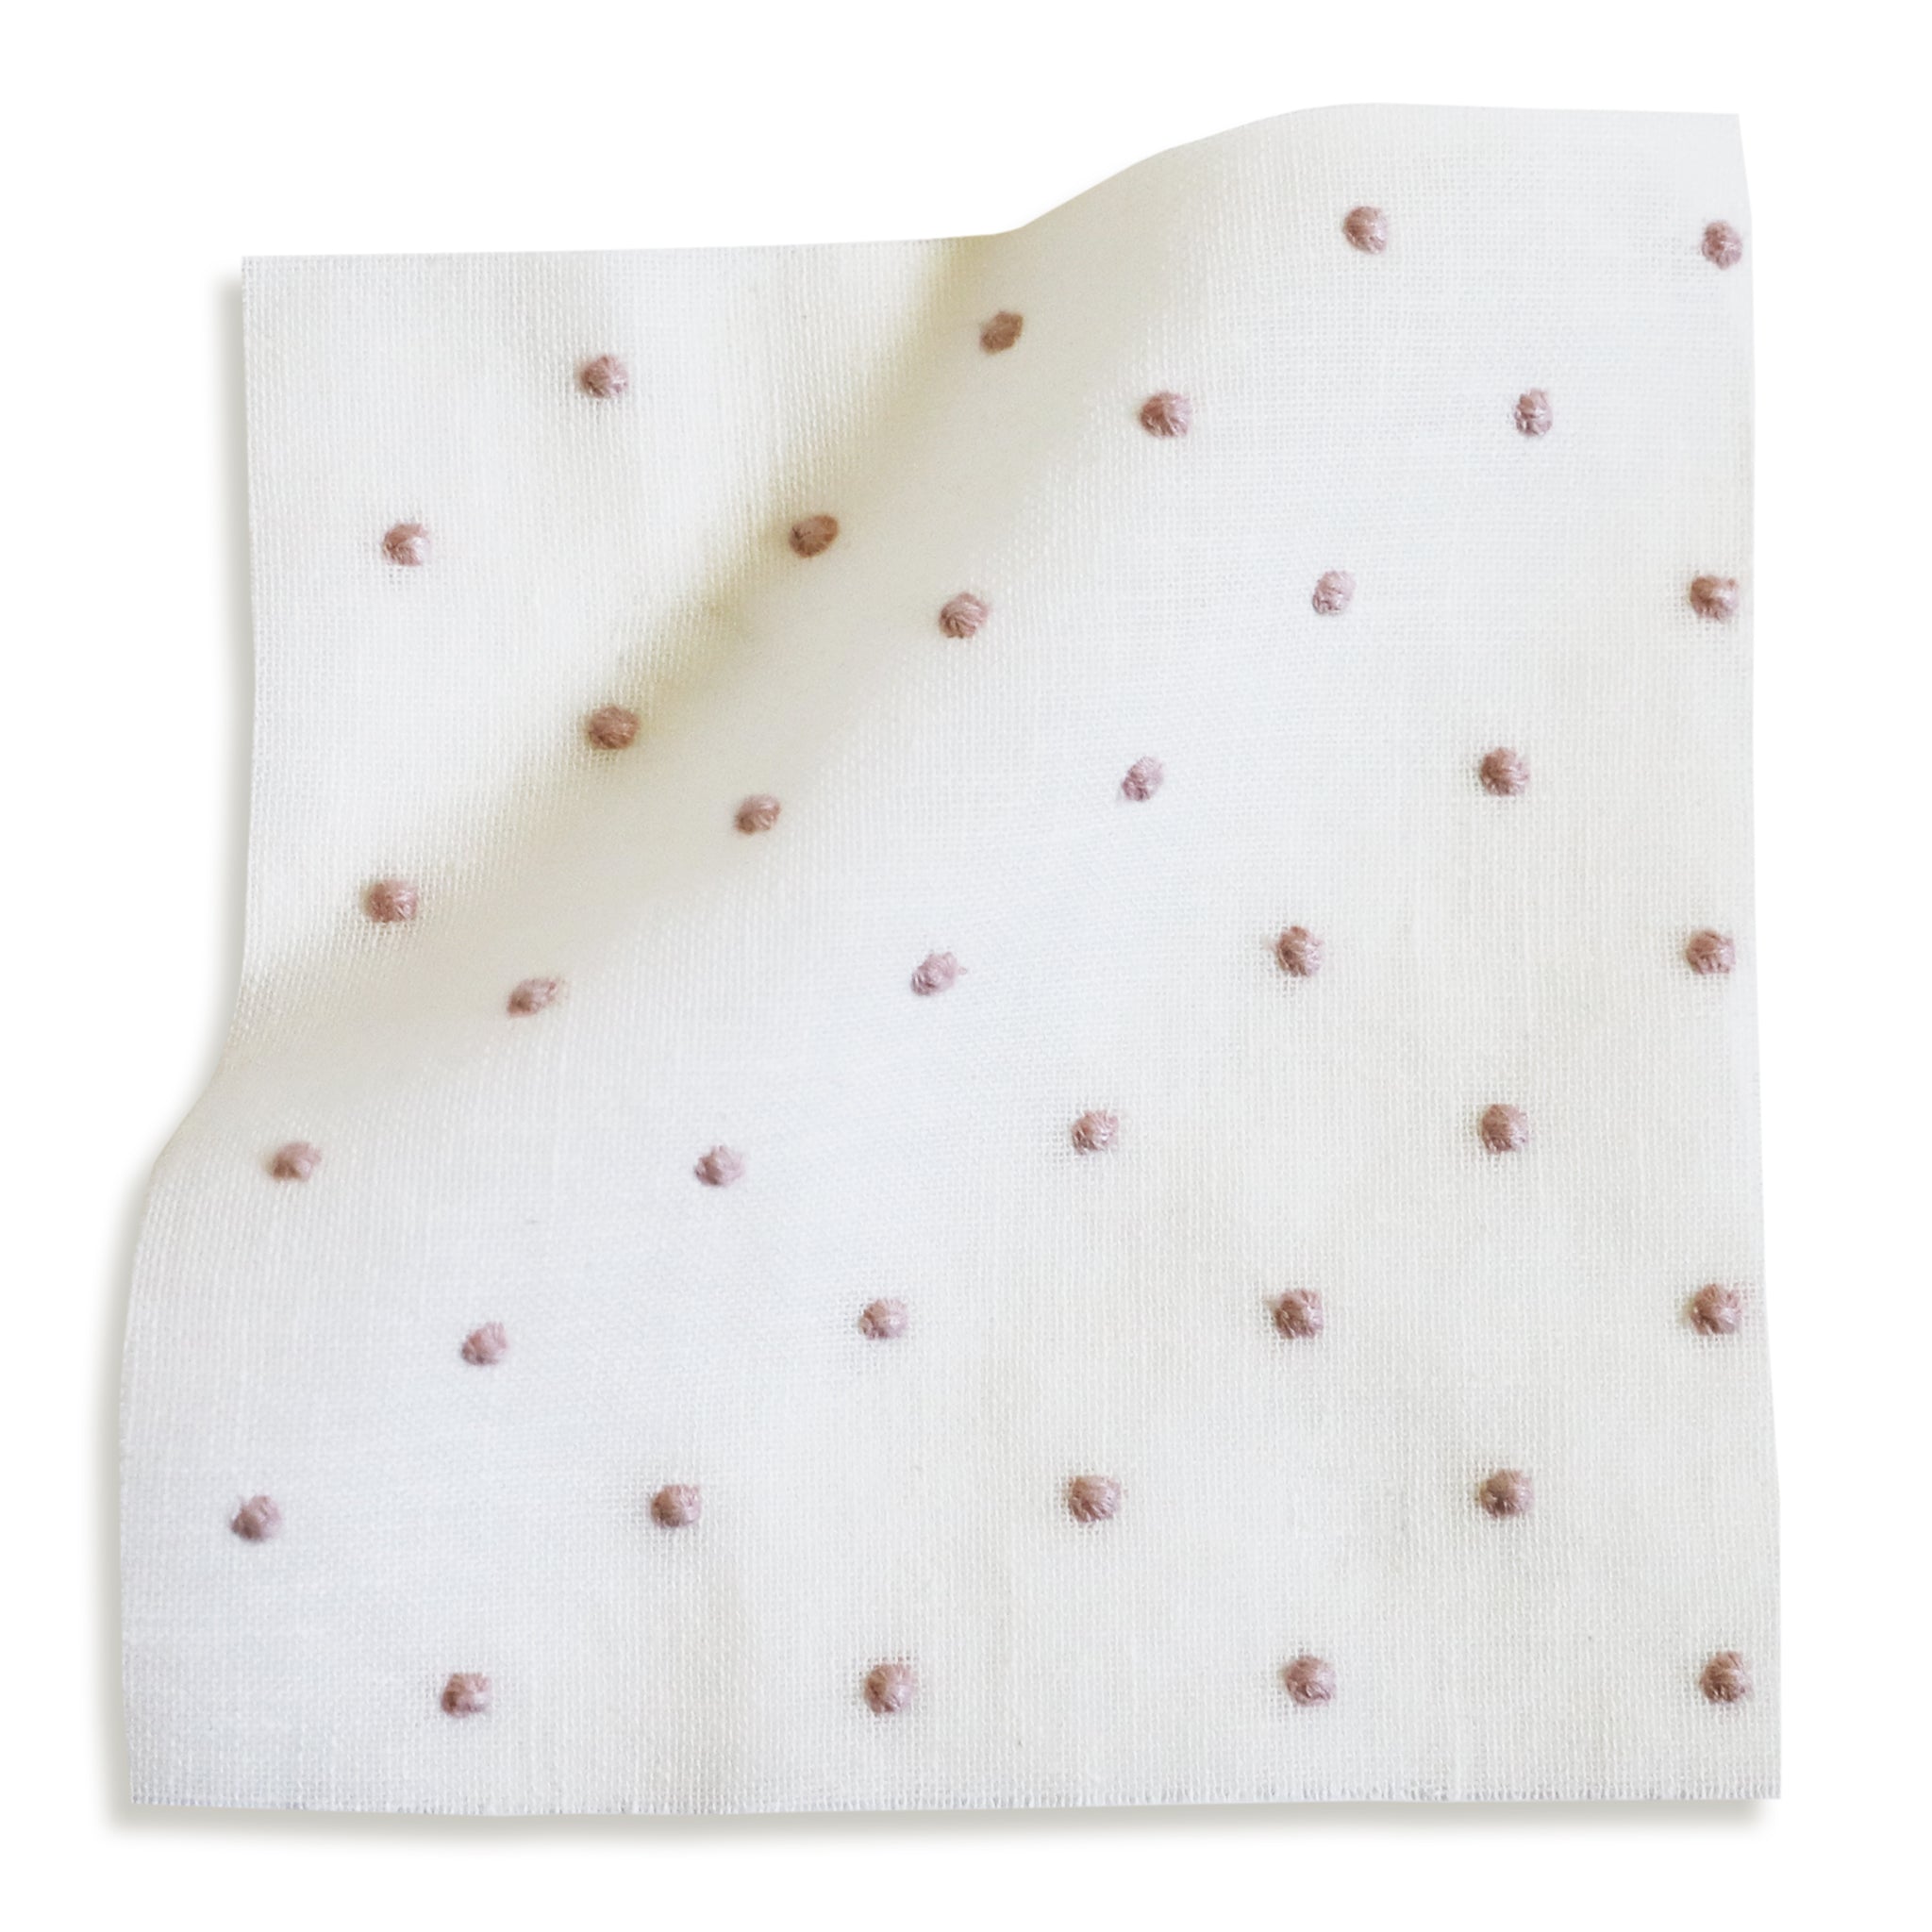 white sheer fabric with embroidered pink polka dot swatch